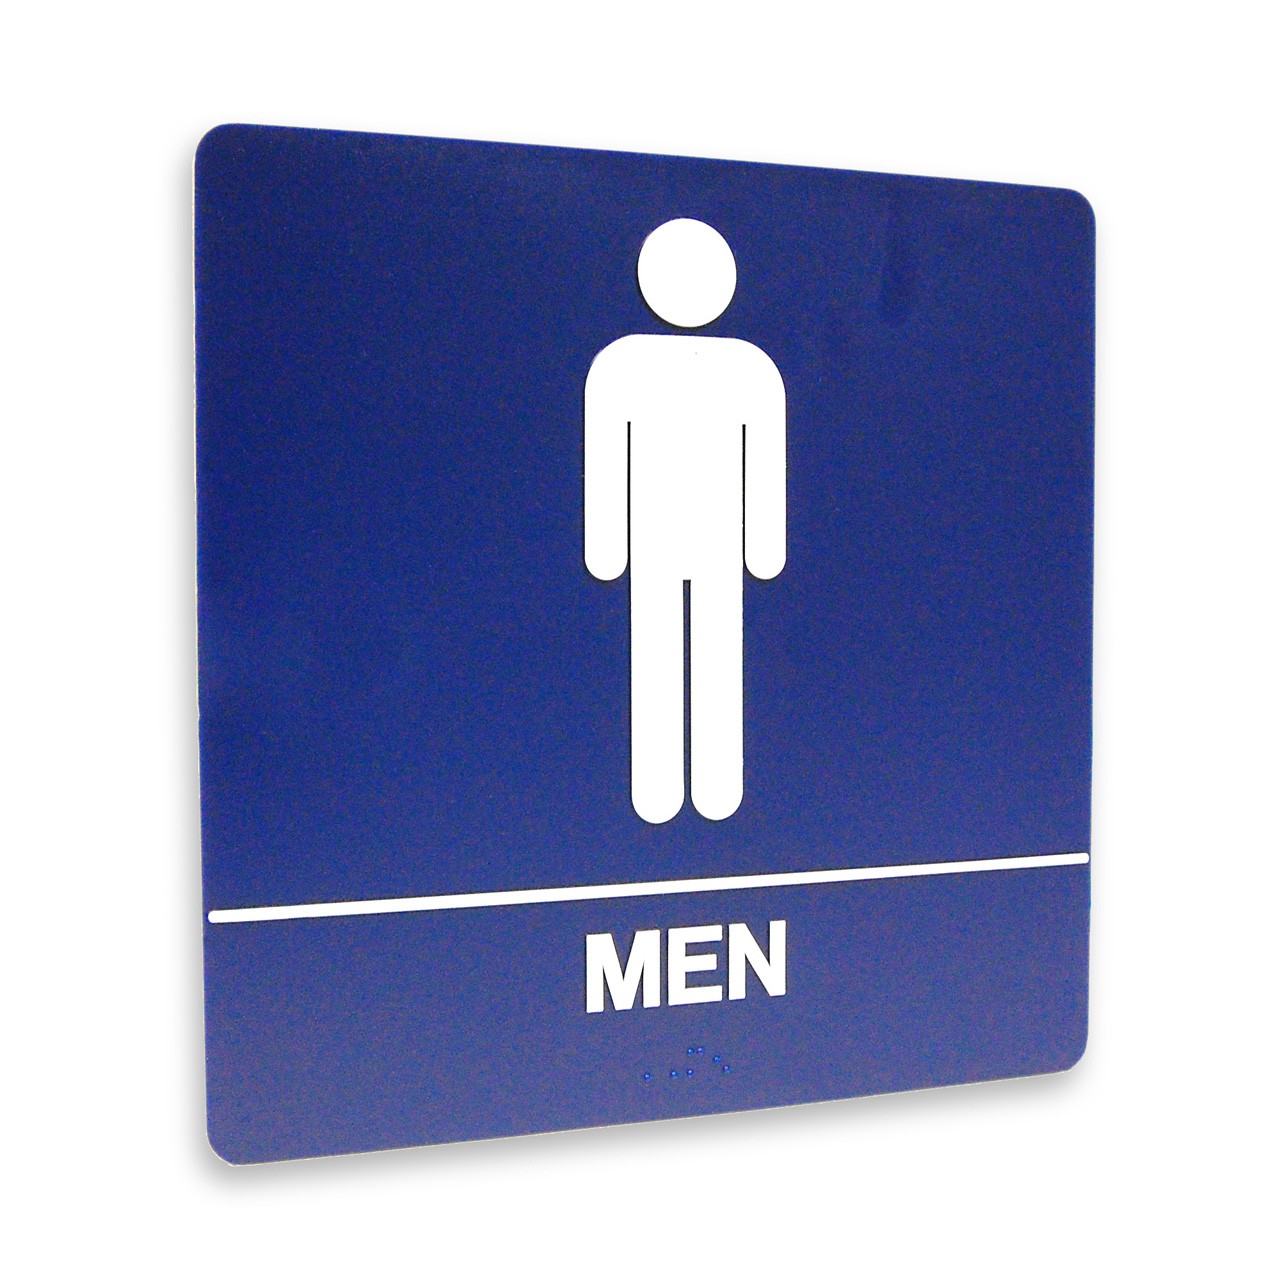 Male Restroom Sign - Home Decor Mags